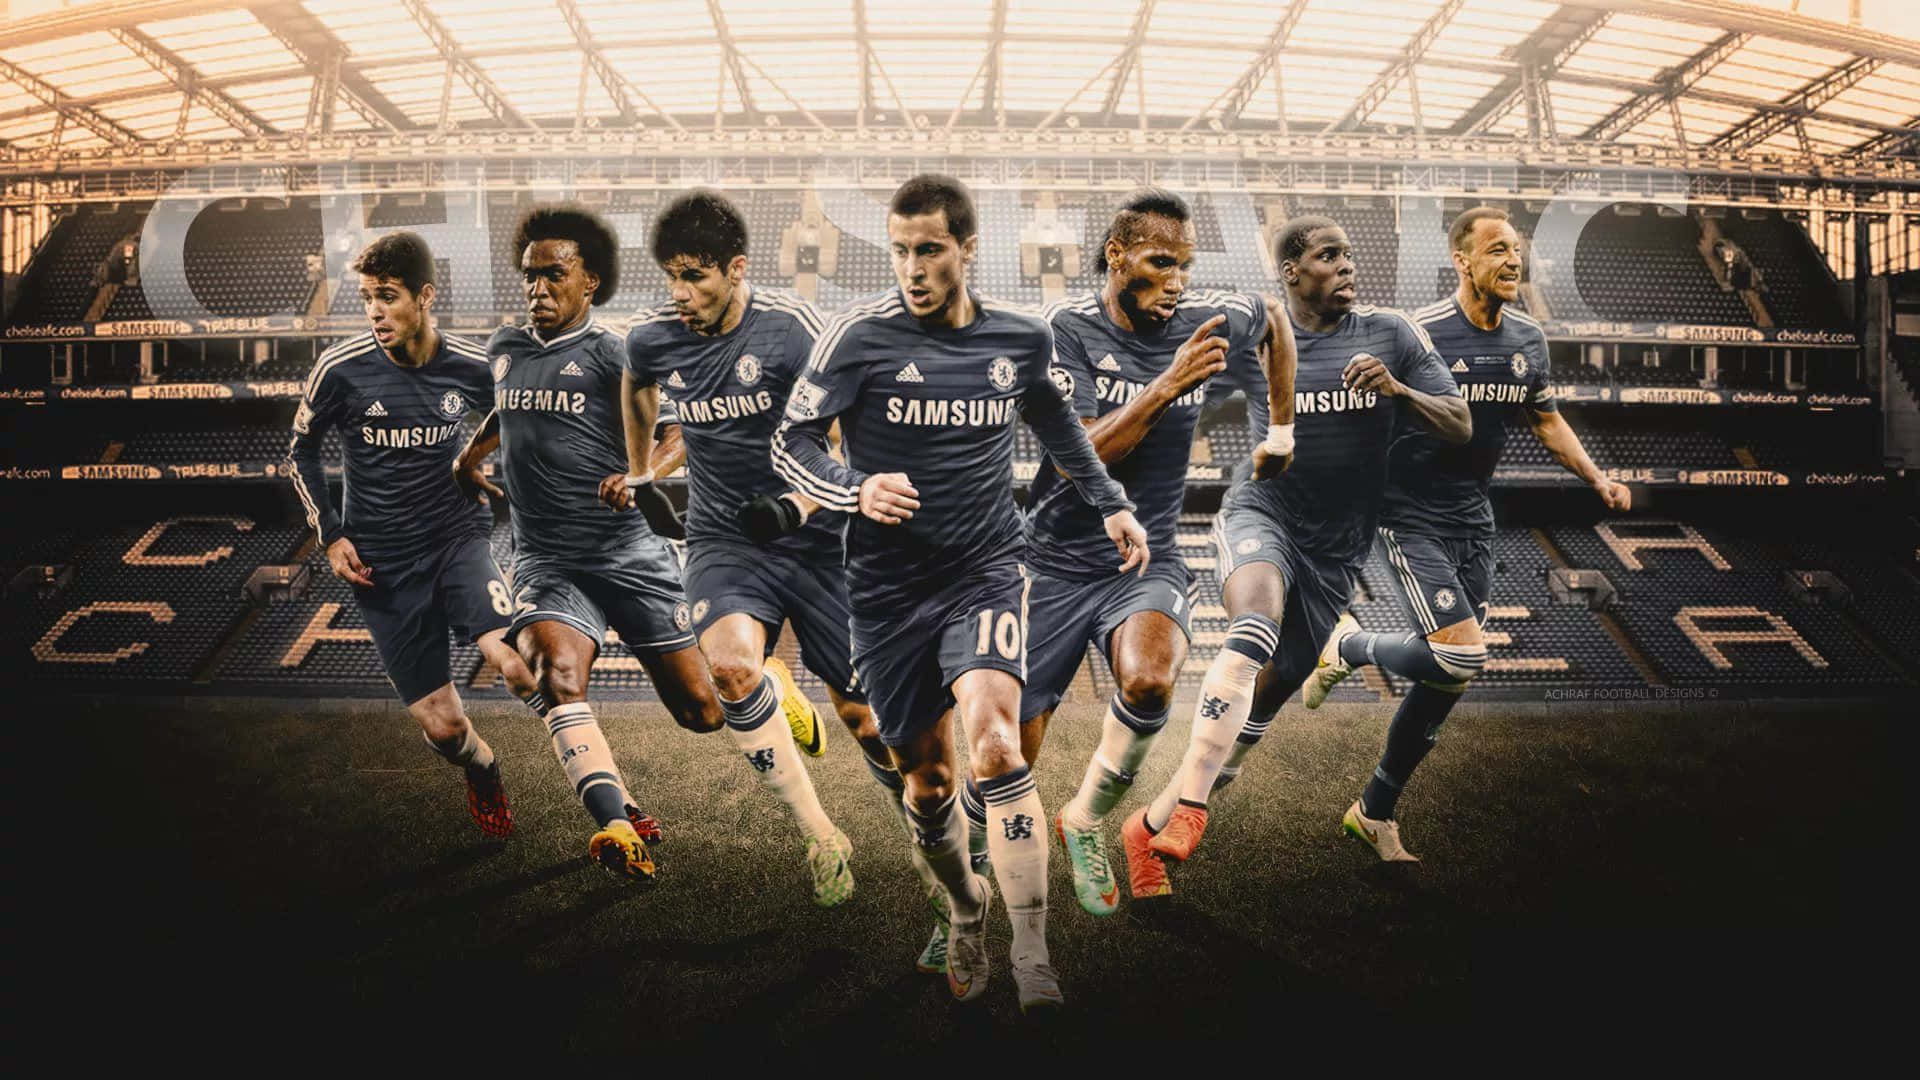 Football Wallpapers Chelsea FC - Wallpaper Cave